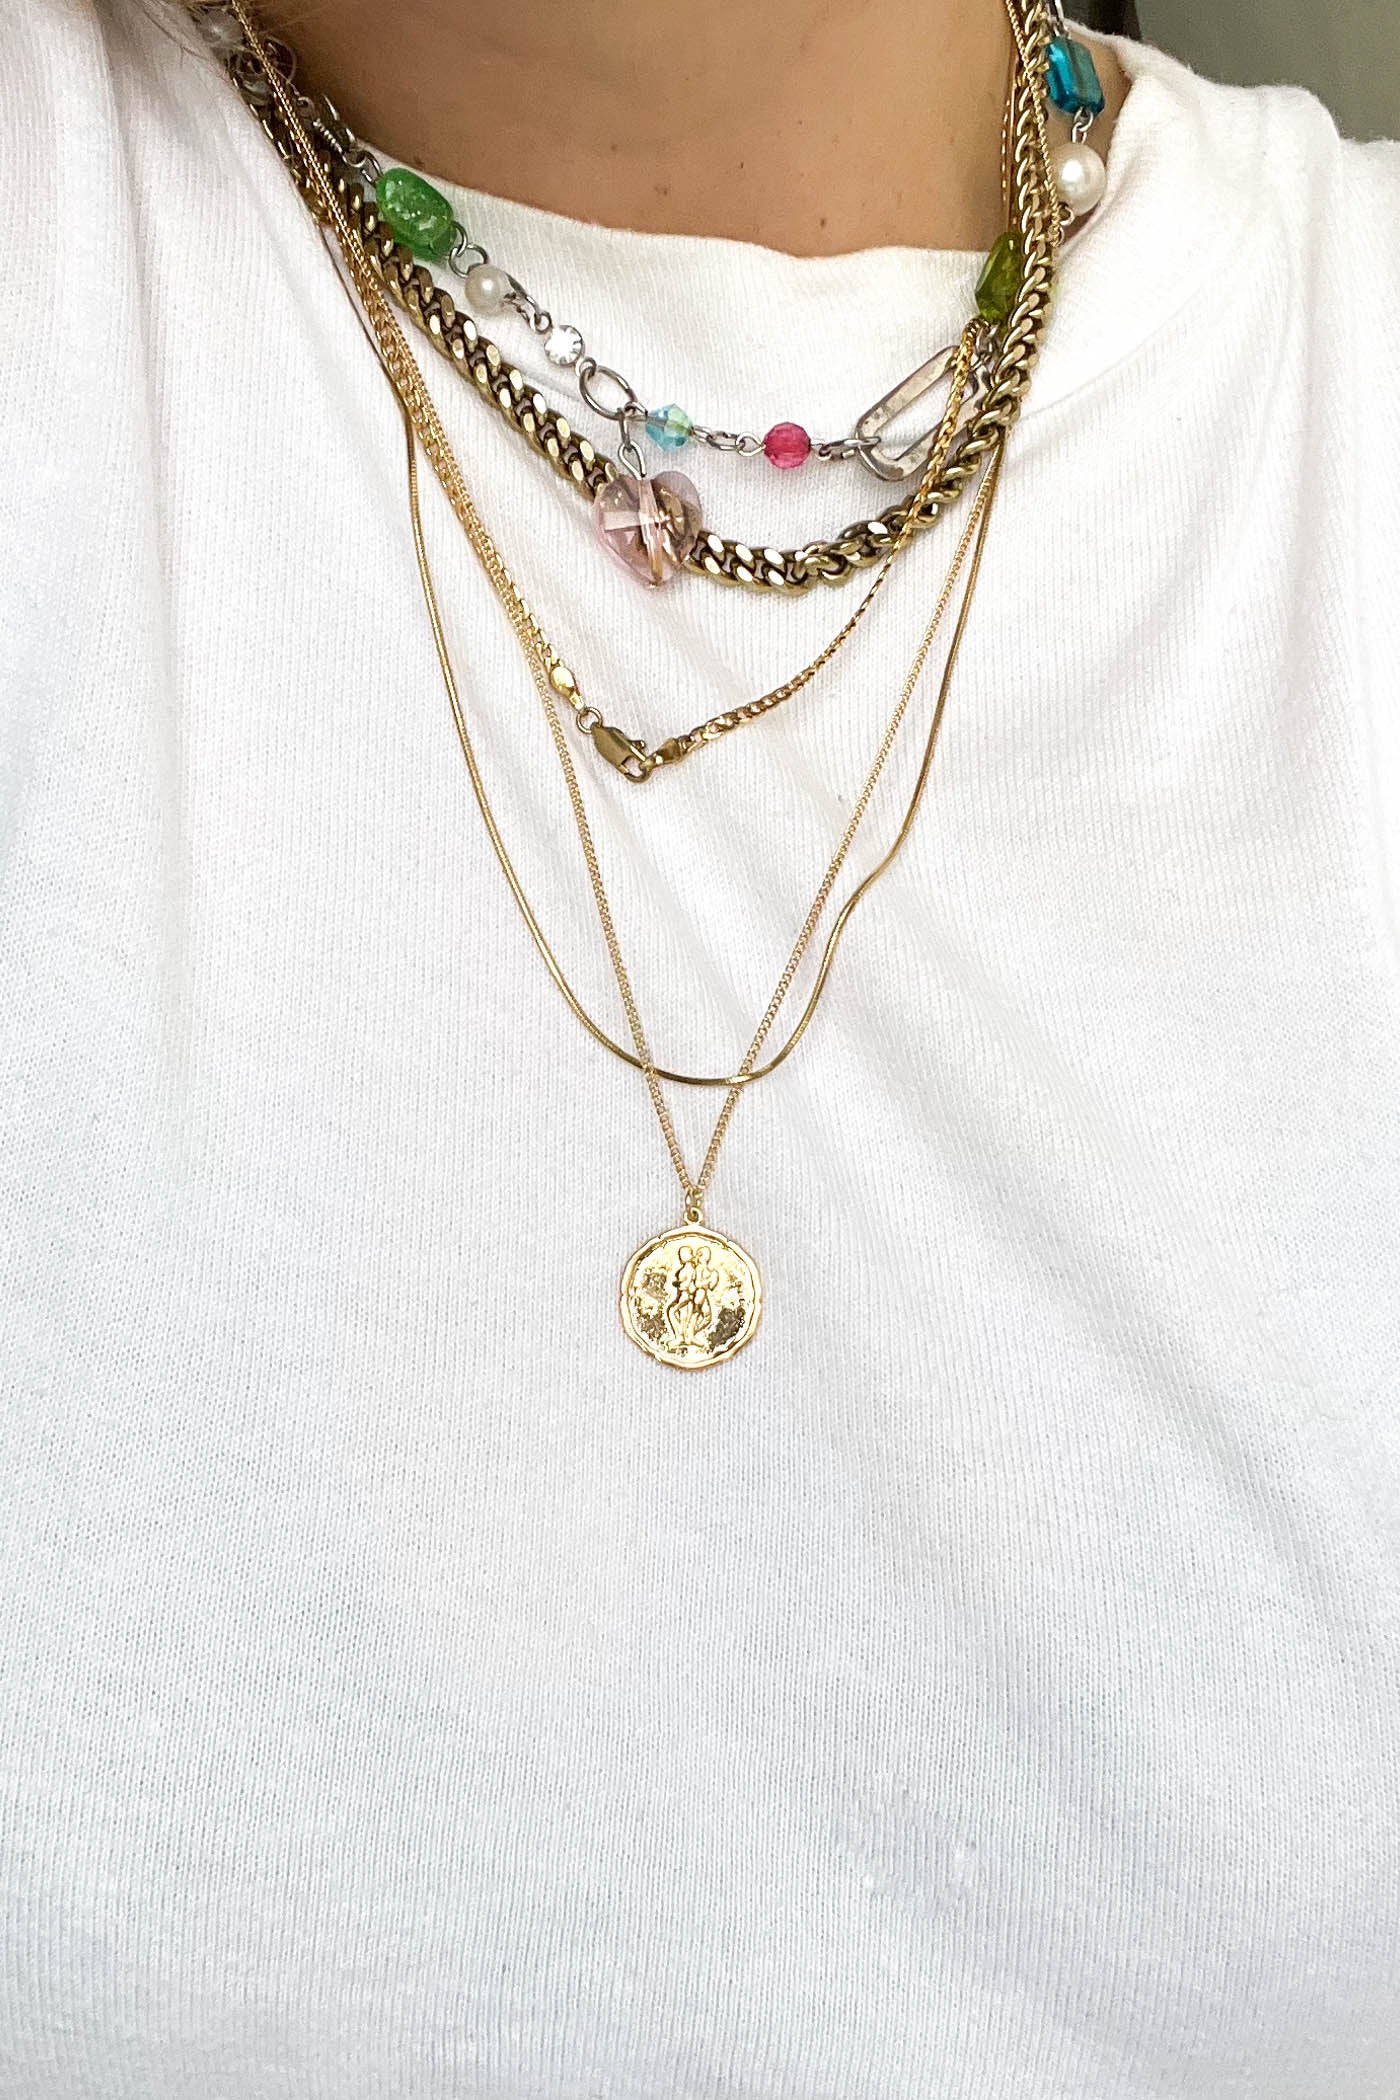 Star Sign Gold Pendant Necklace